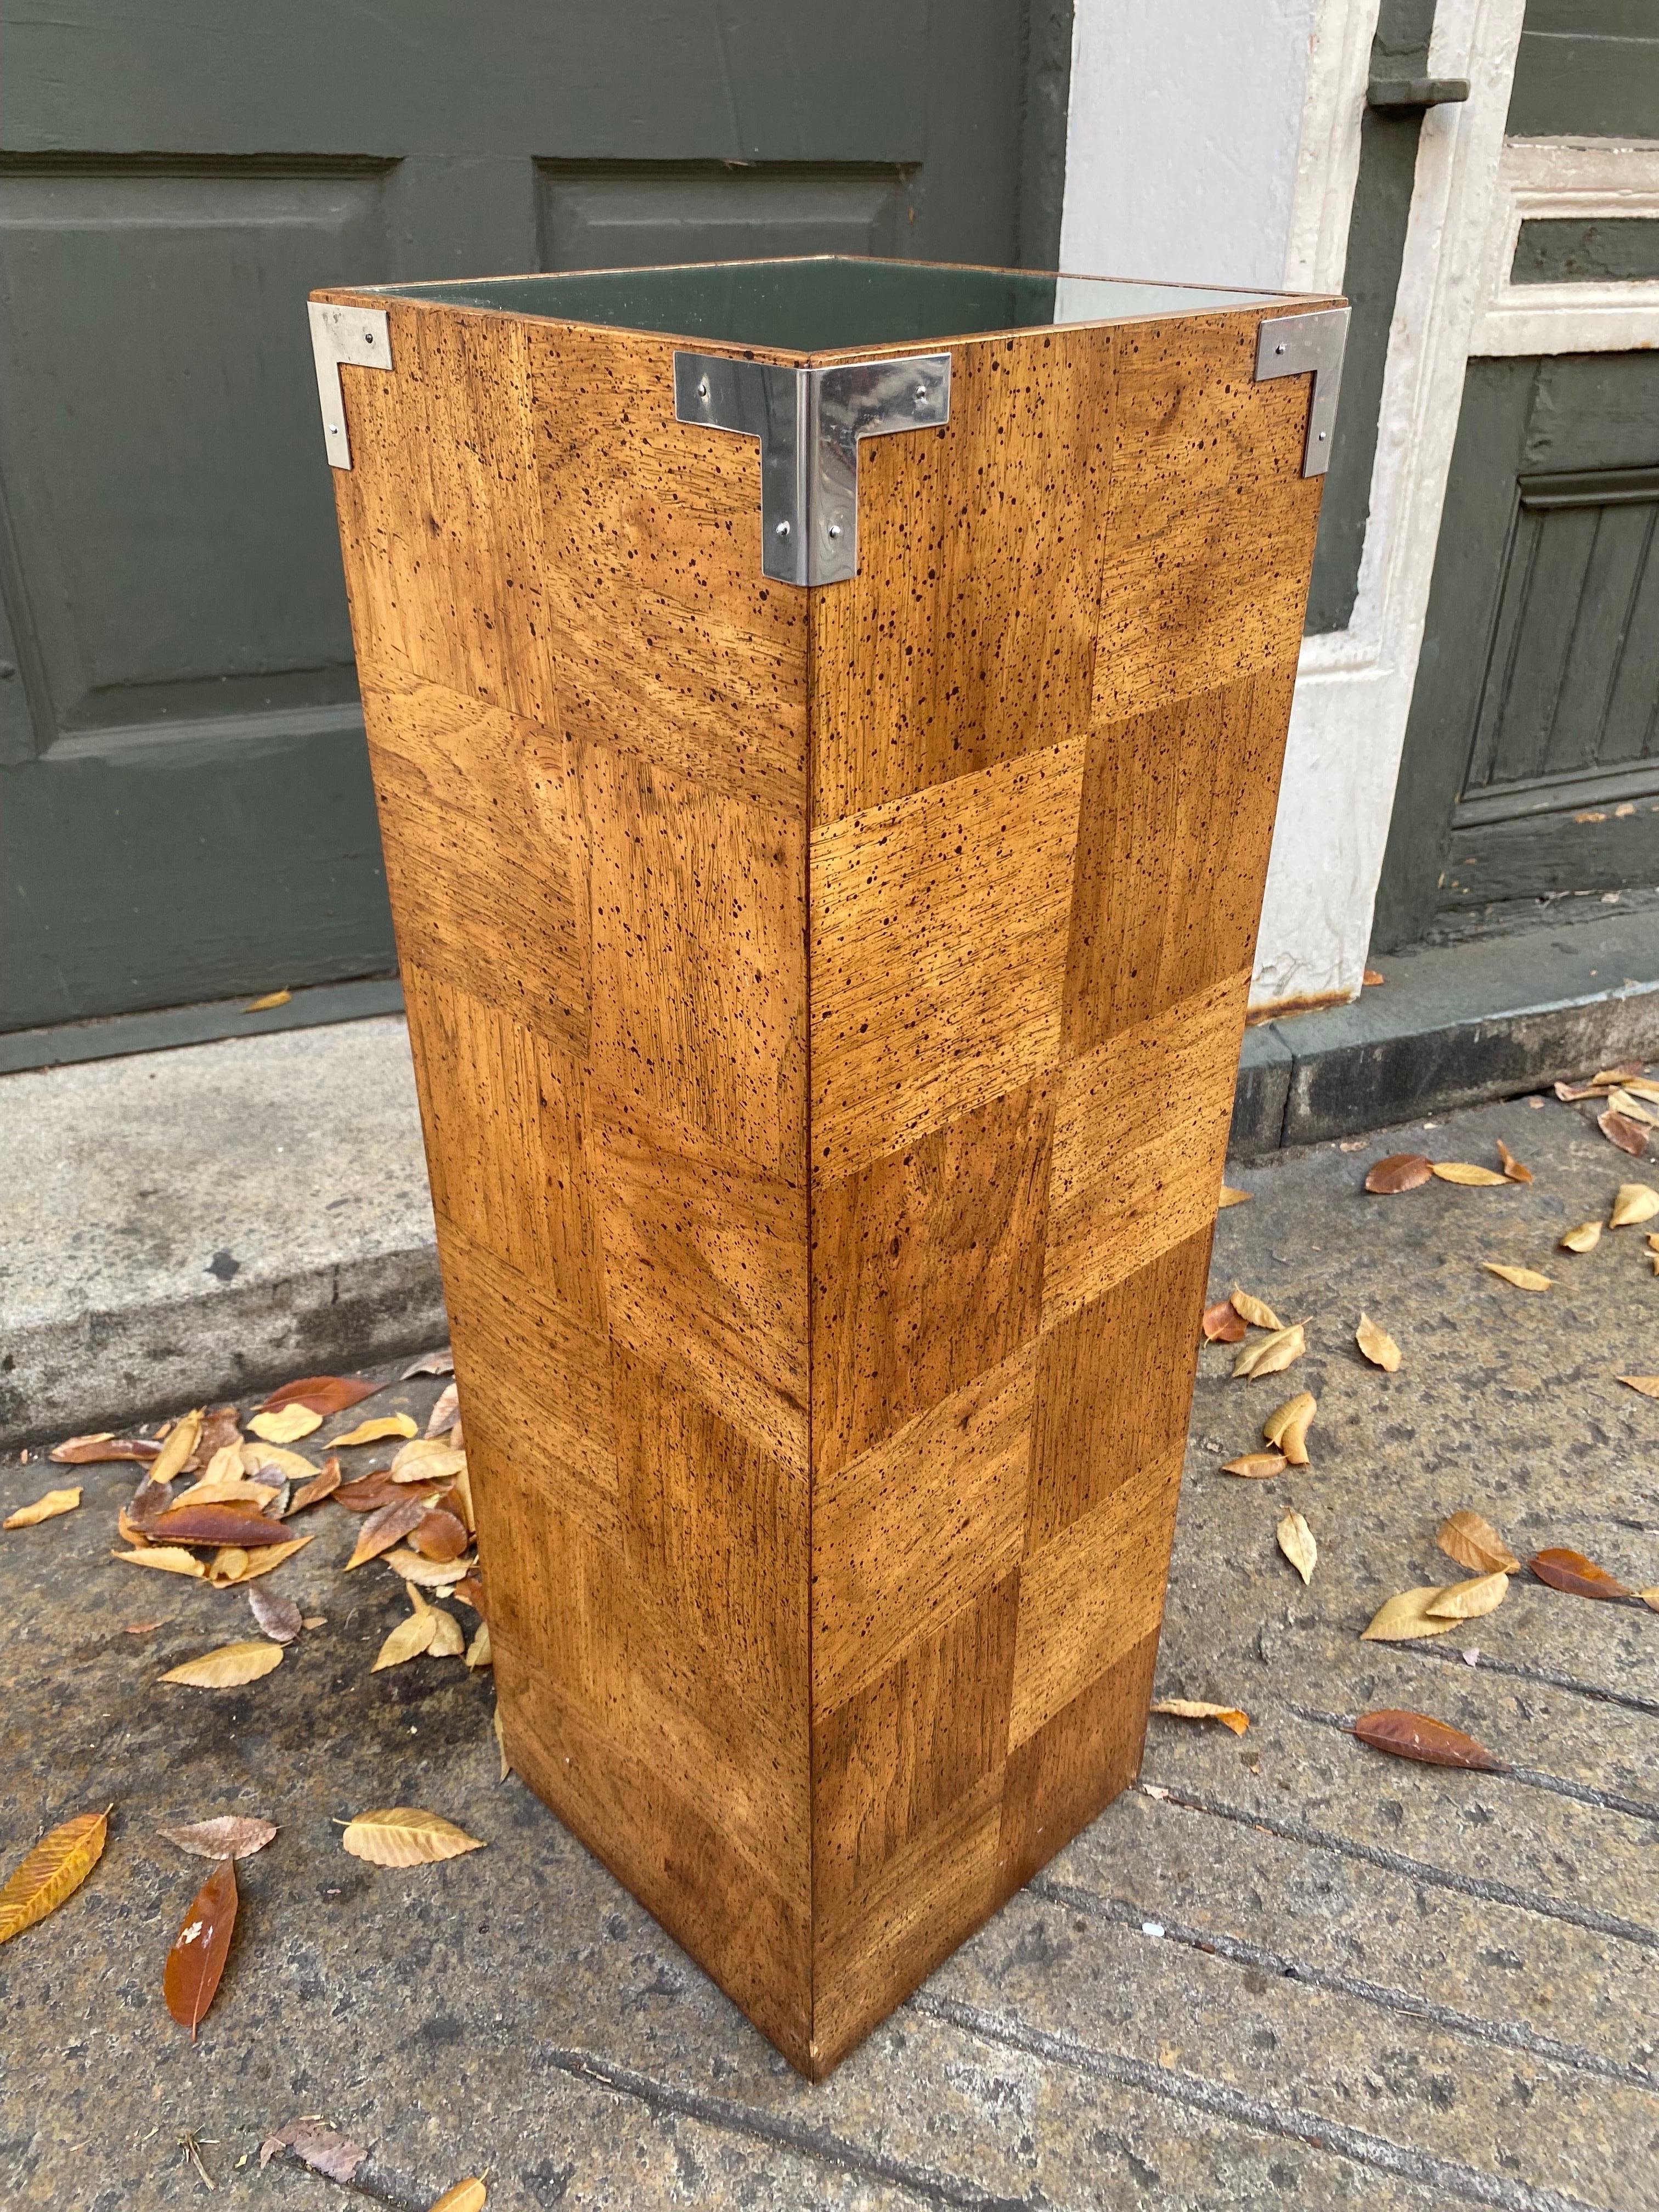 Nice Burl Patch Pedestal with Mirror top and chrome corners.  Have seen attributed to Milo Baughman, but what isn't?!  Very Nice condition with great grain and color.